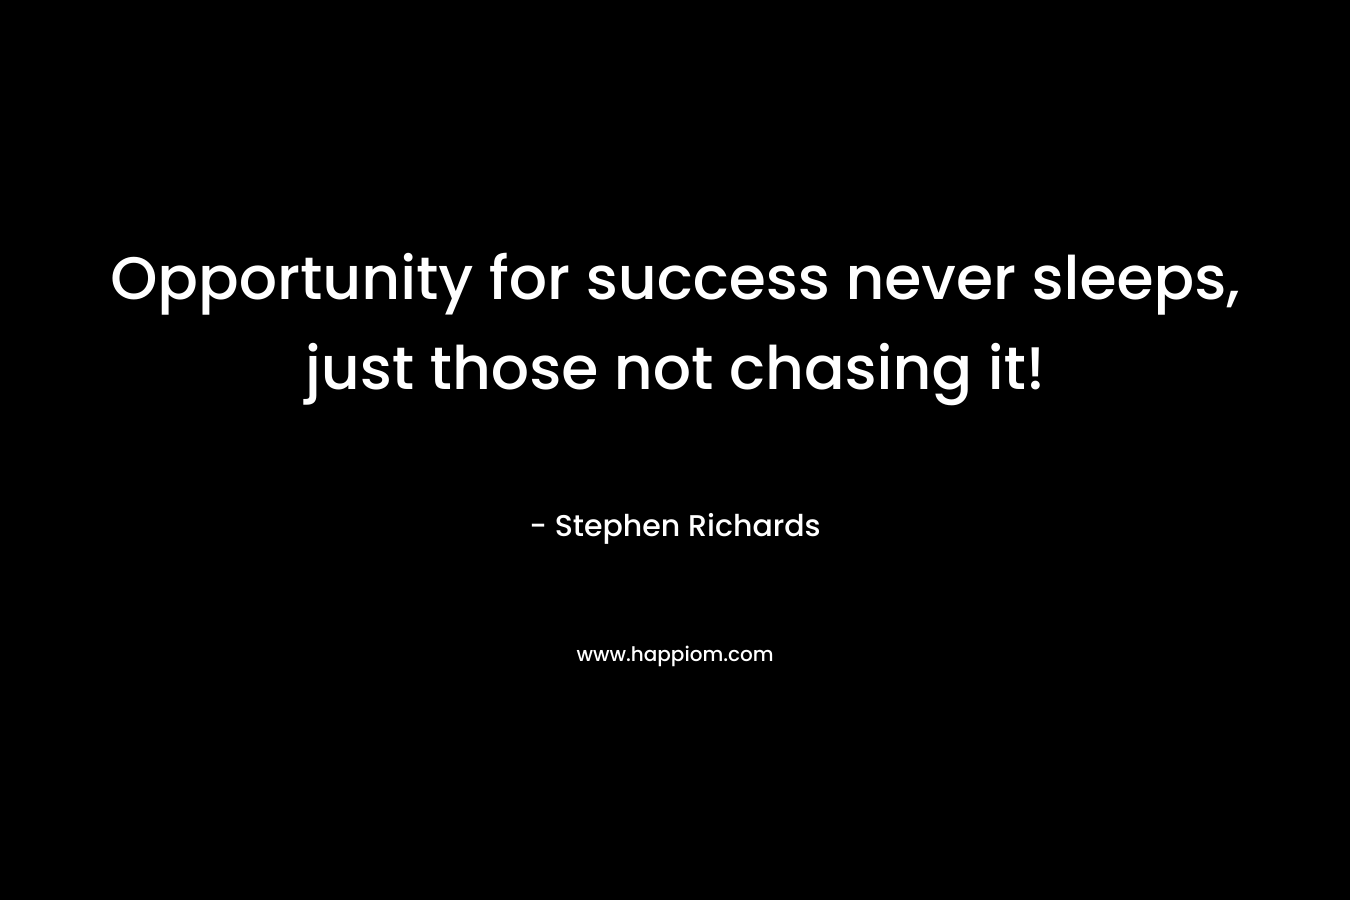 Opportunity for success never sleeps, just those not chasing it!